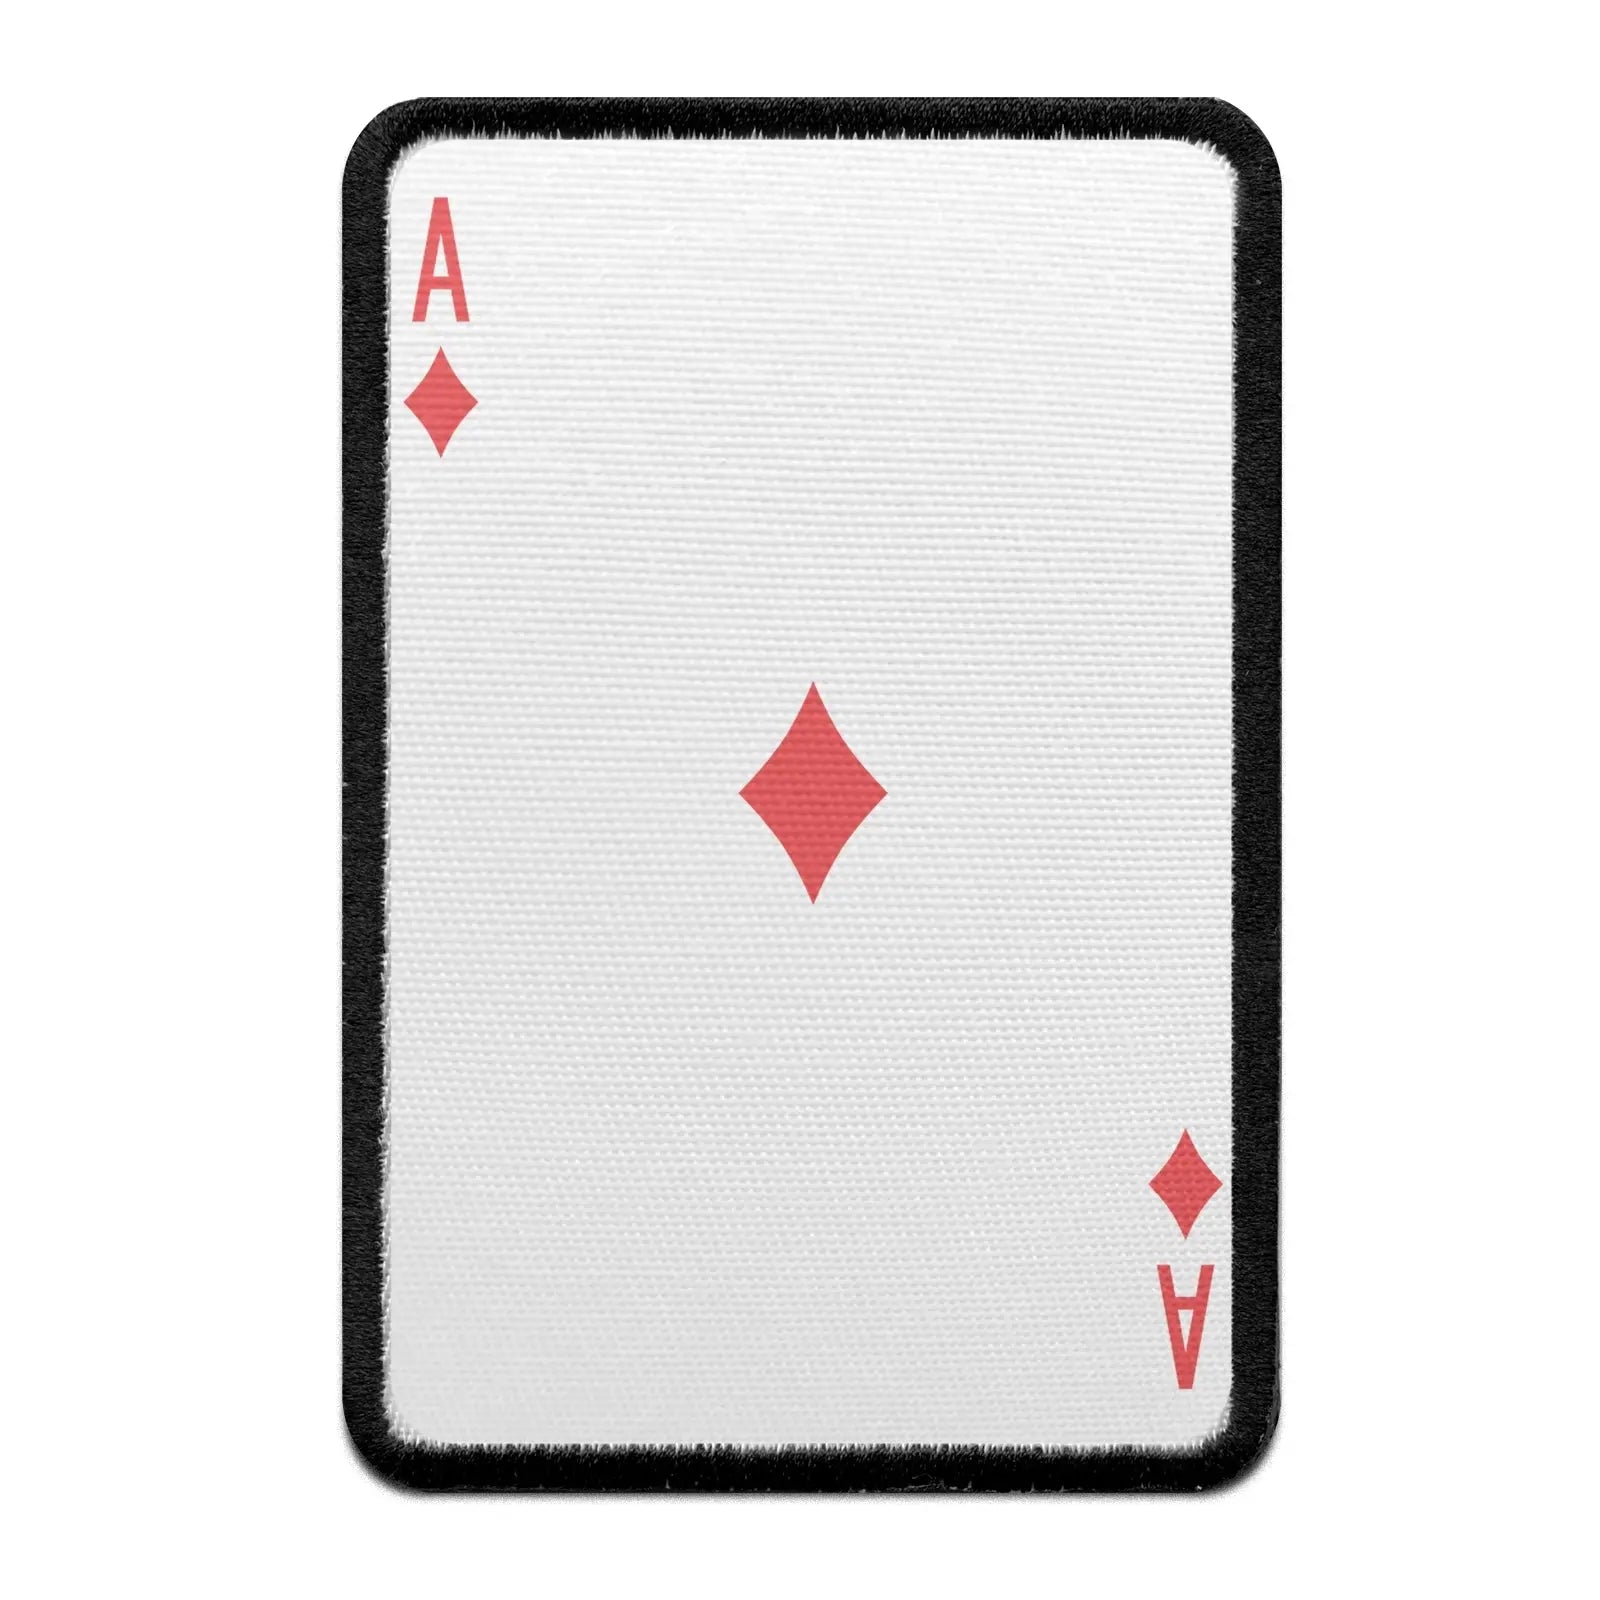 Ace Of Diamonds Card FotoPatch Game Deck Embroidered Iron On 